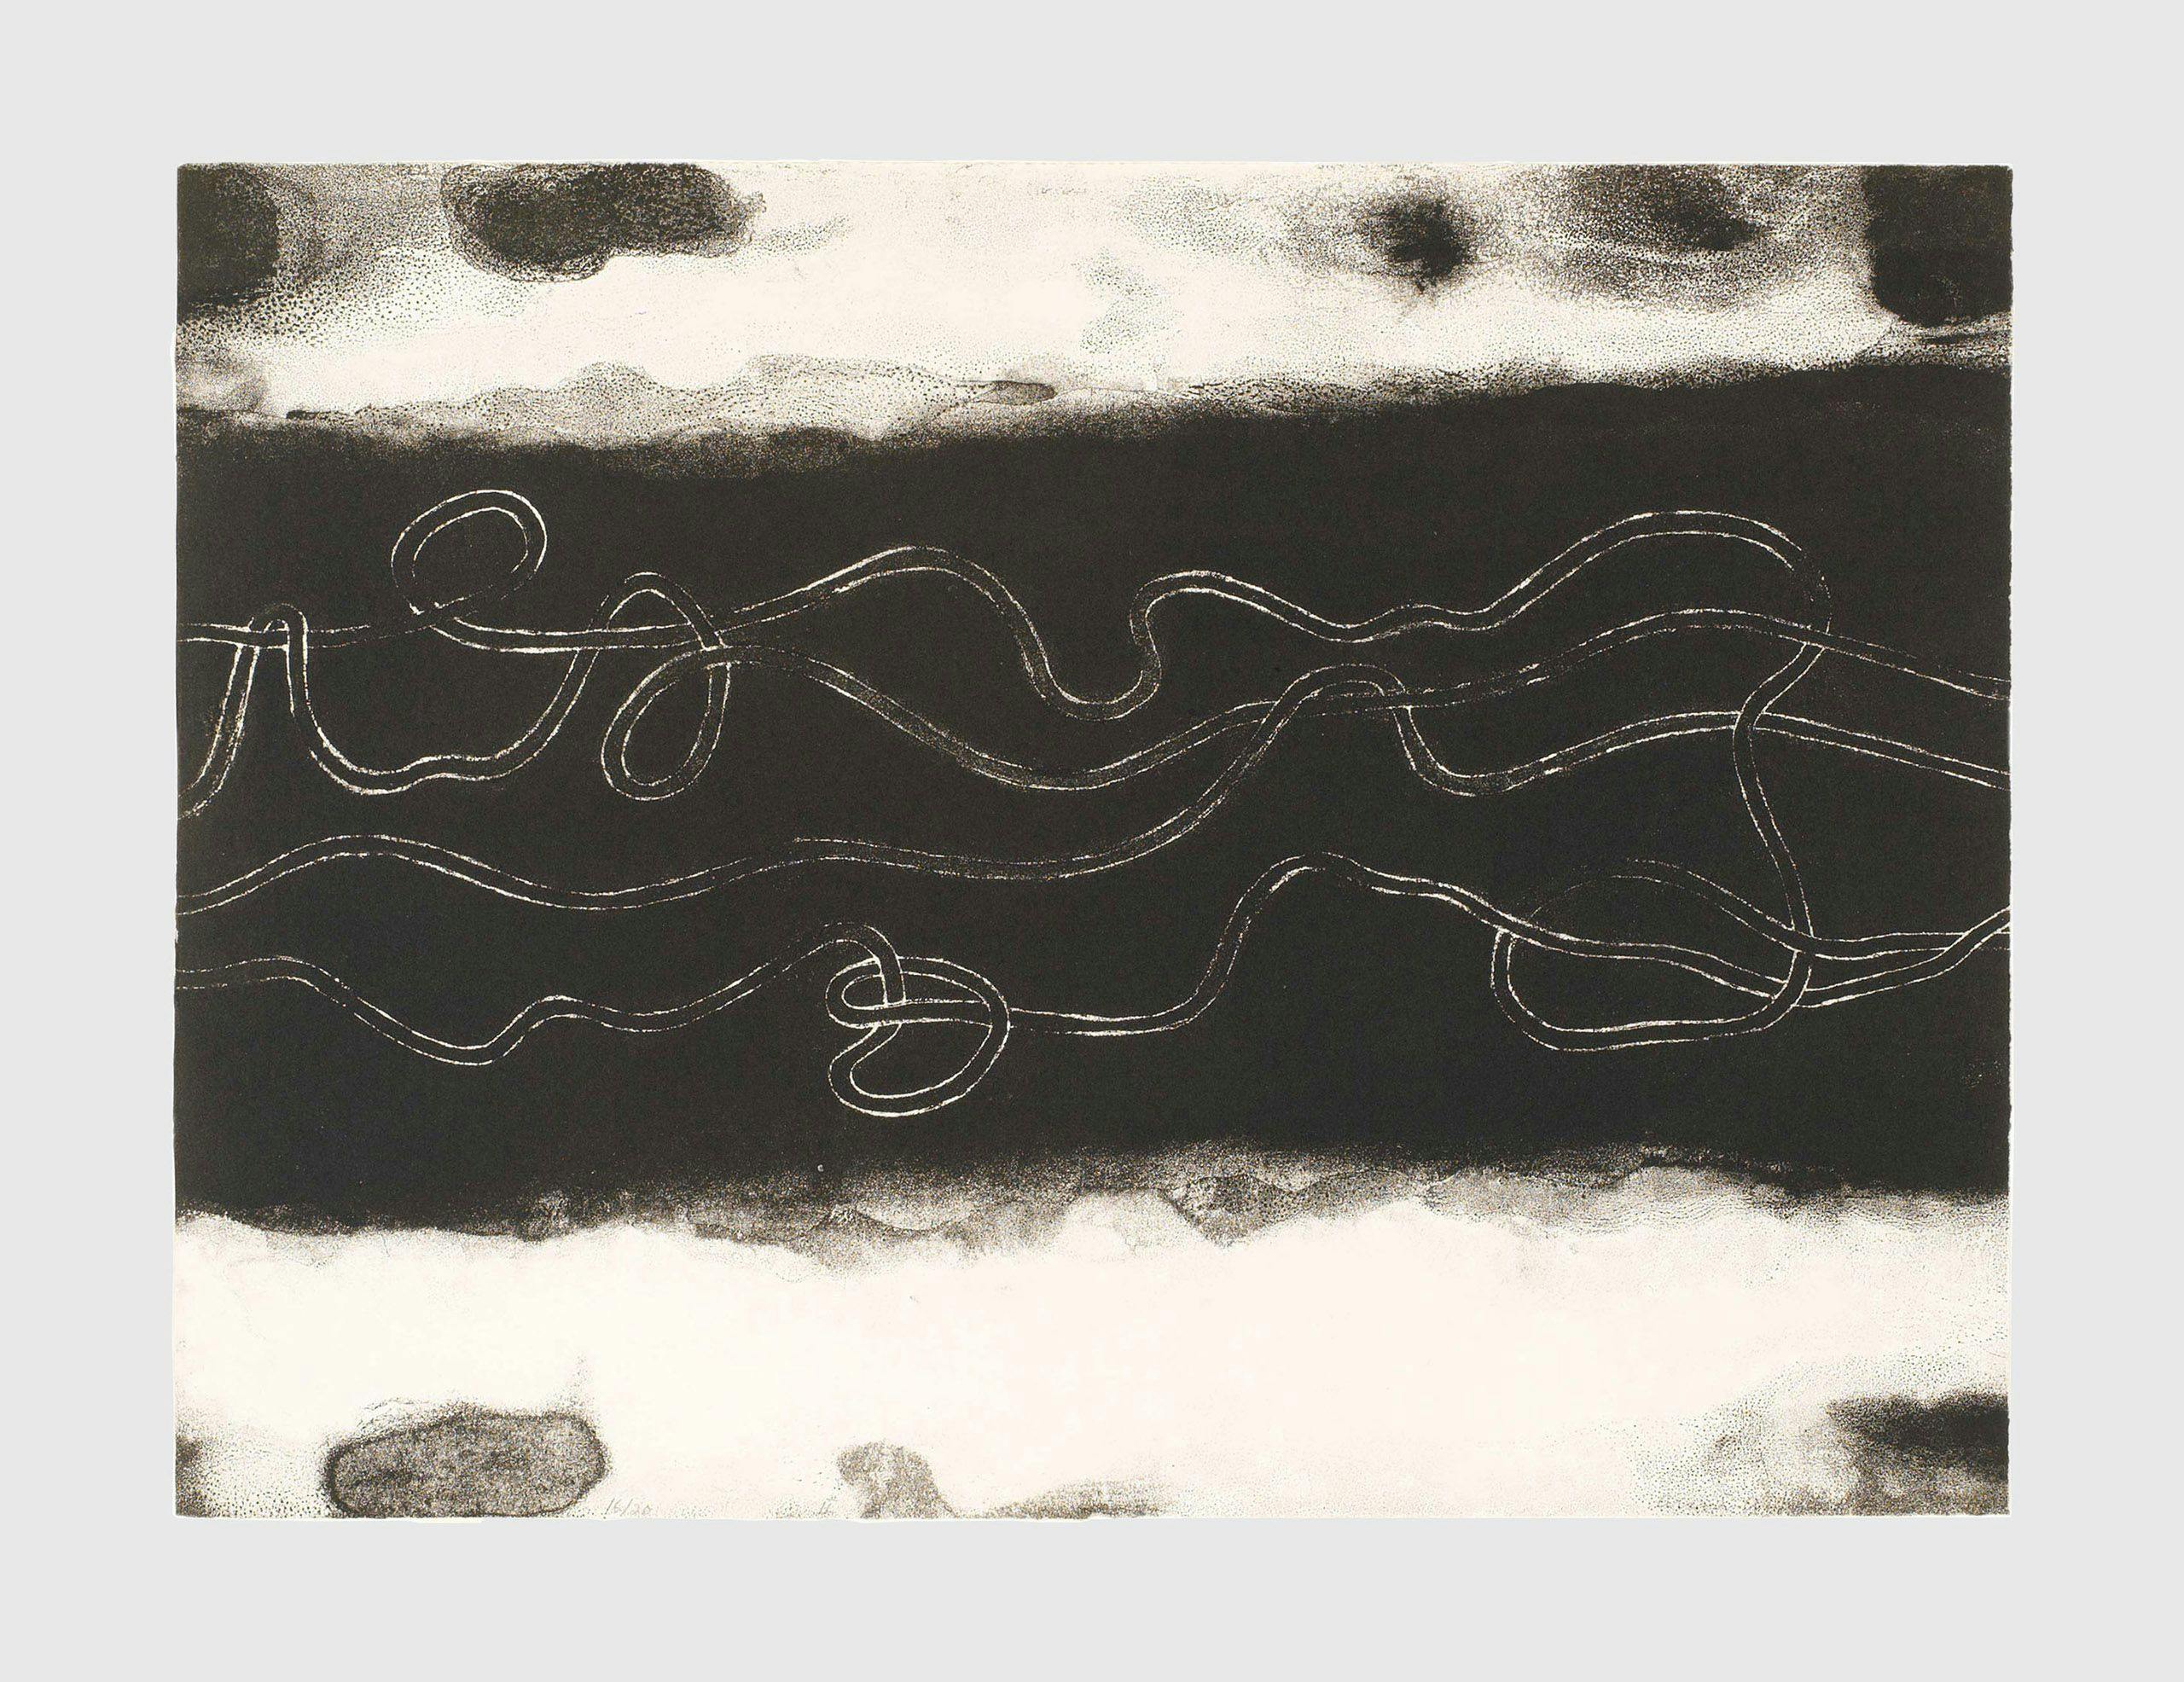 A print by Anni Albers, titled Line Involvement II, dated 1964.